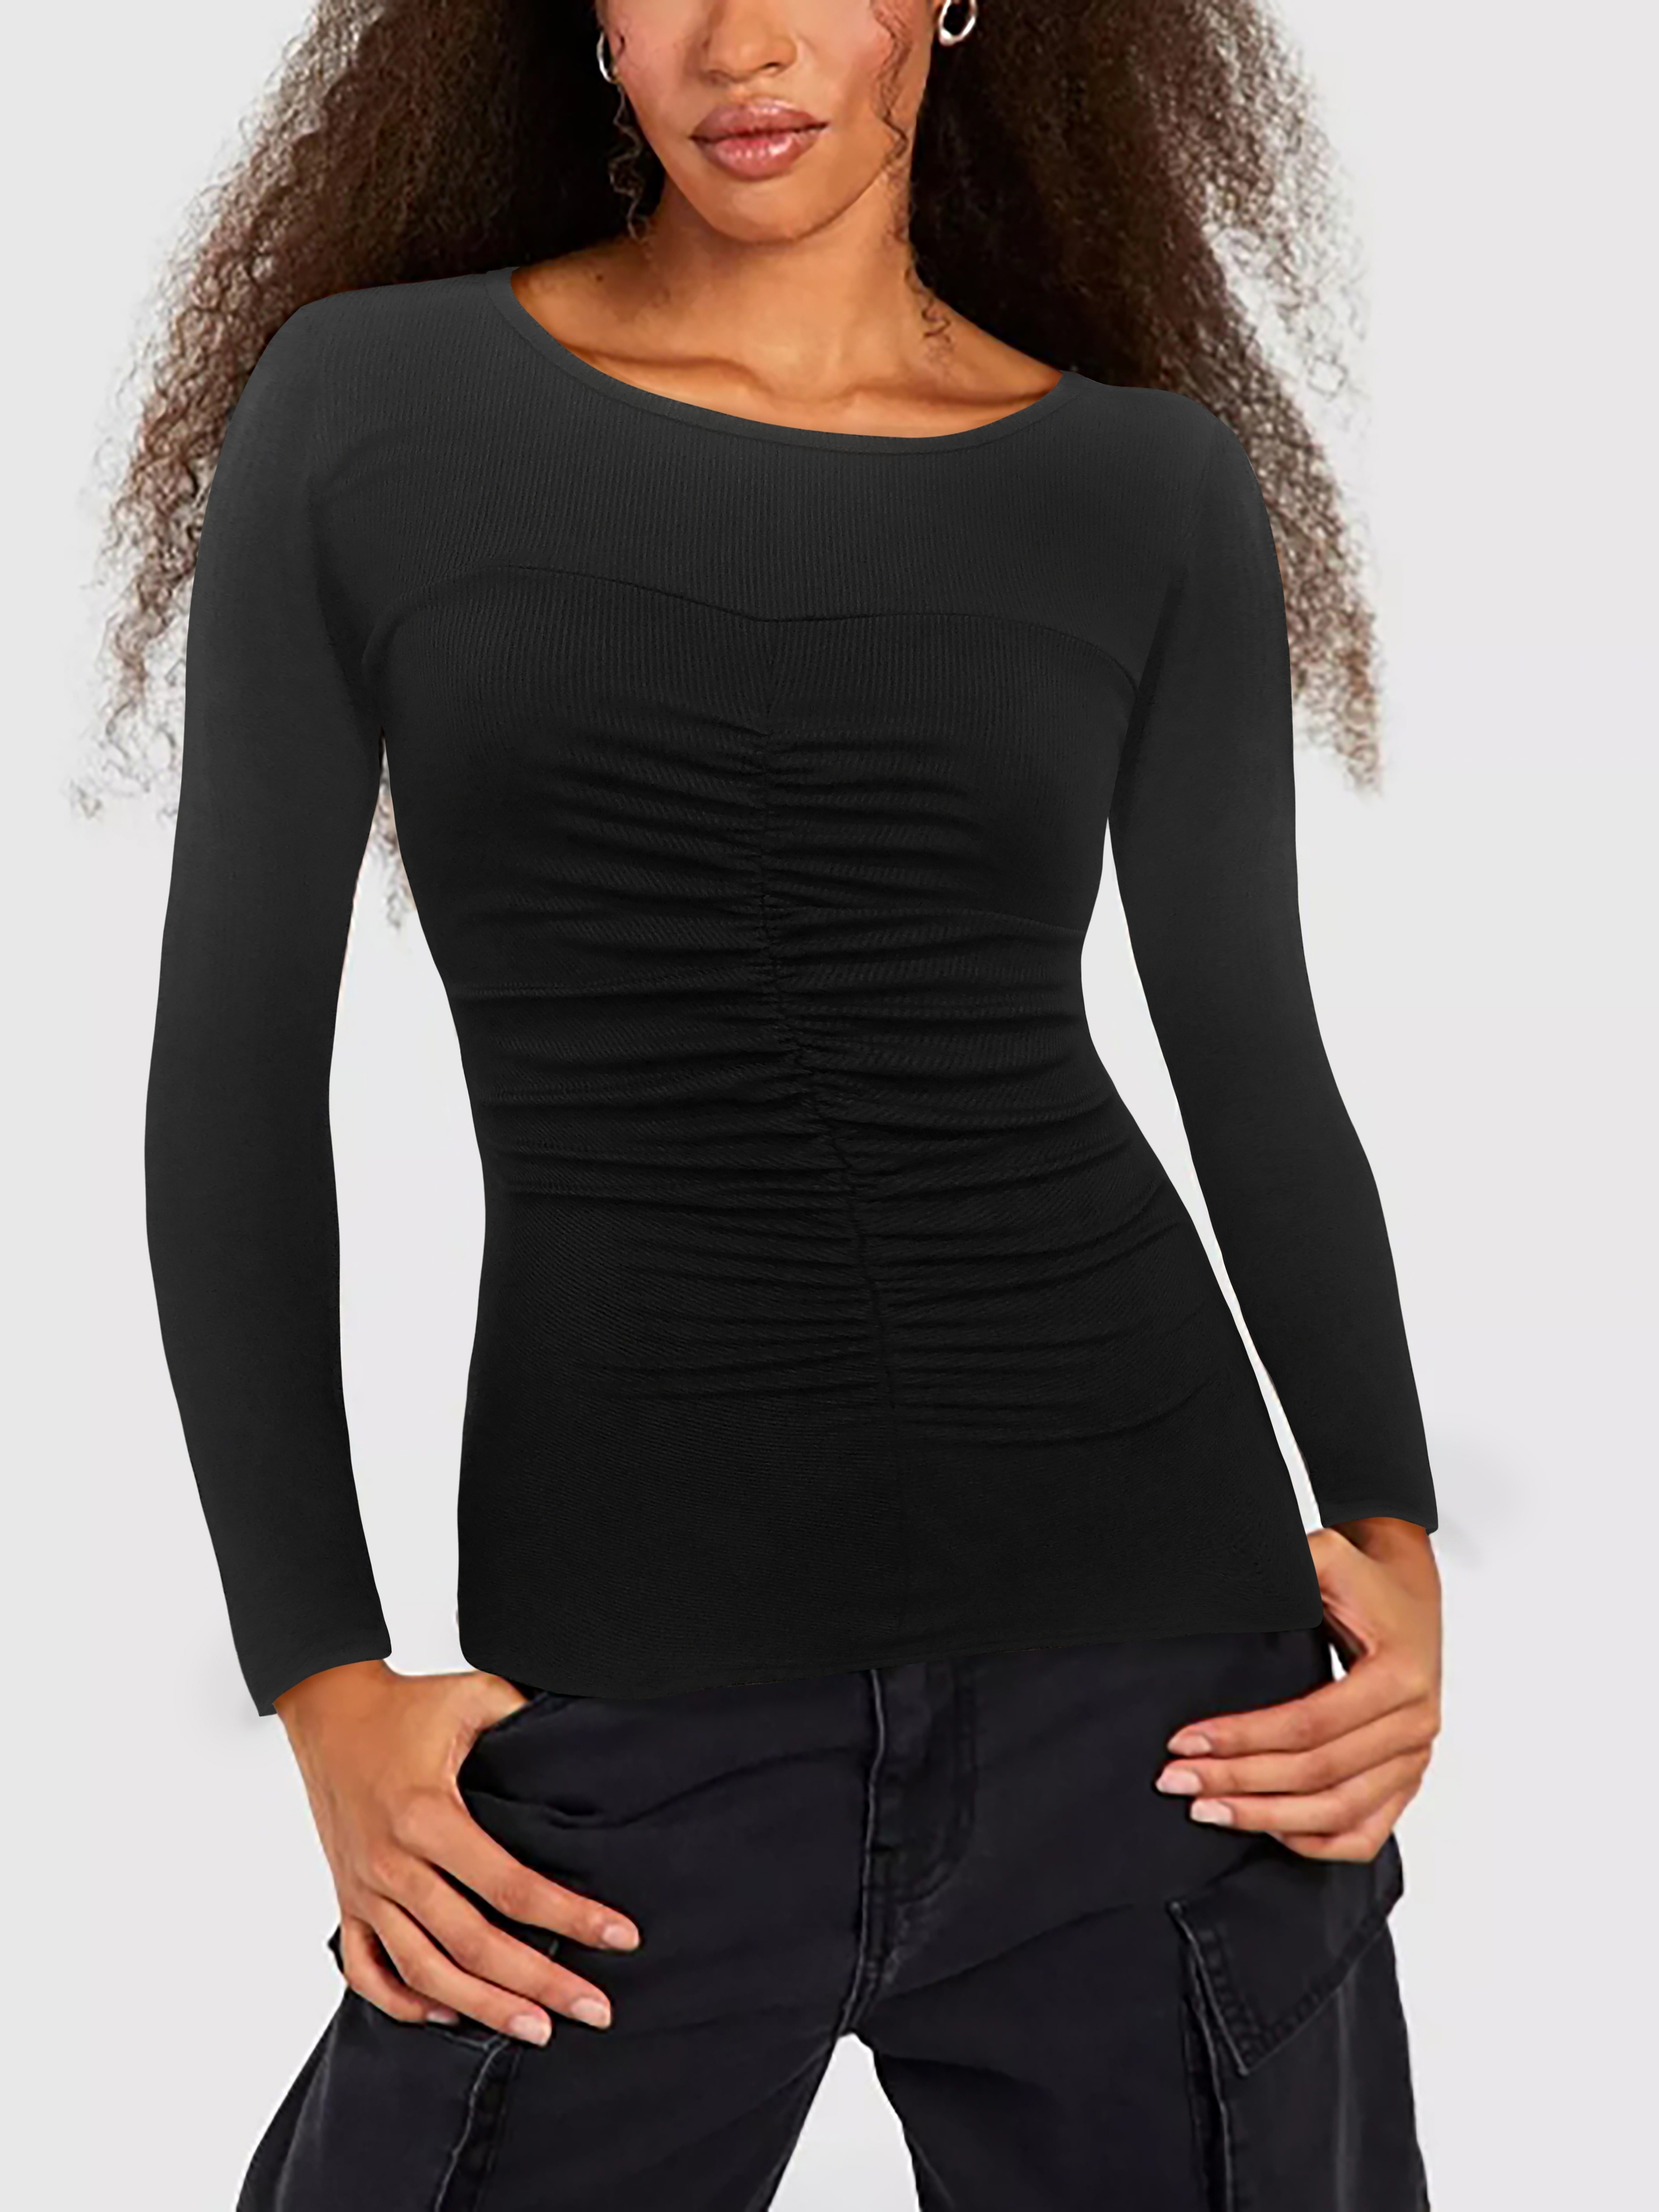 Ruched Long Sleeve Top 153, Black